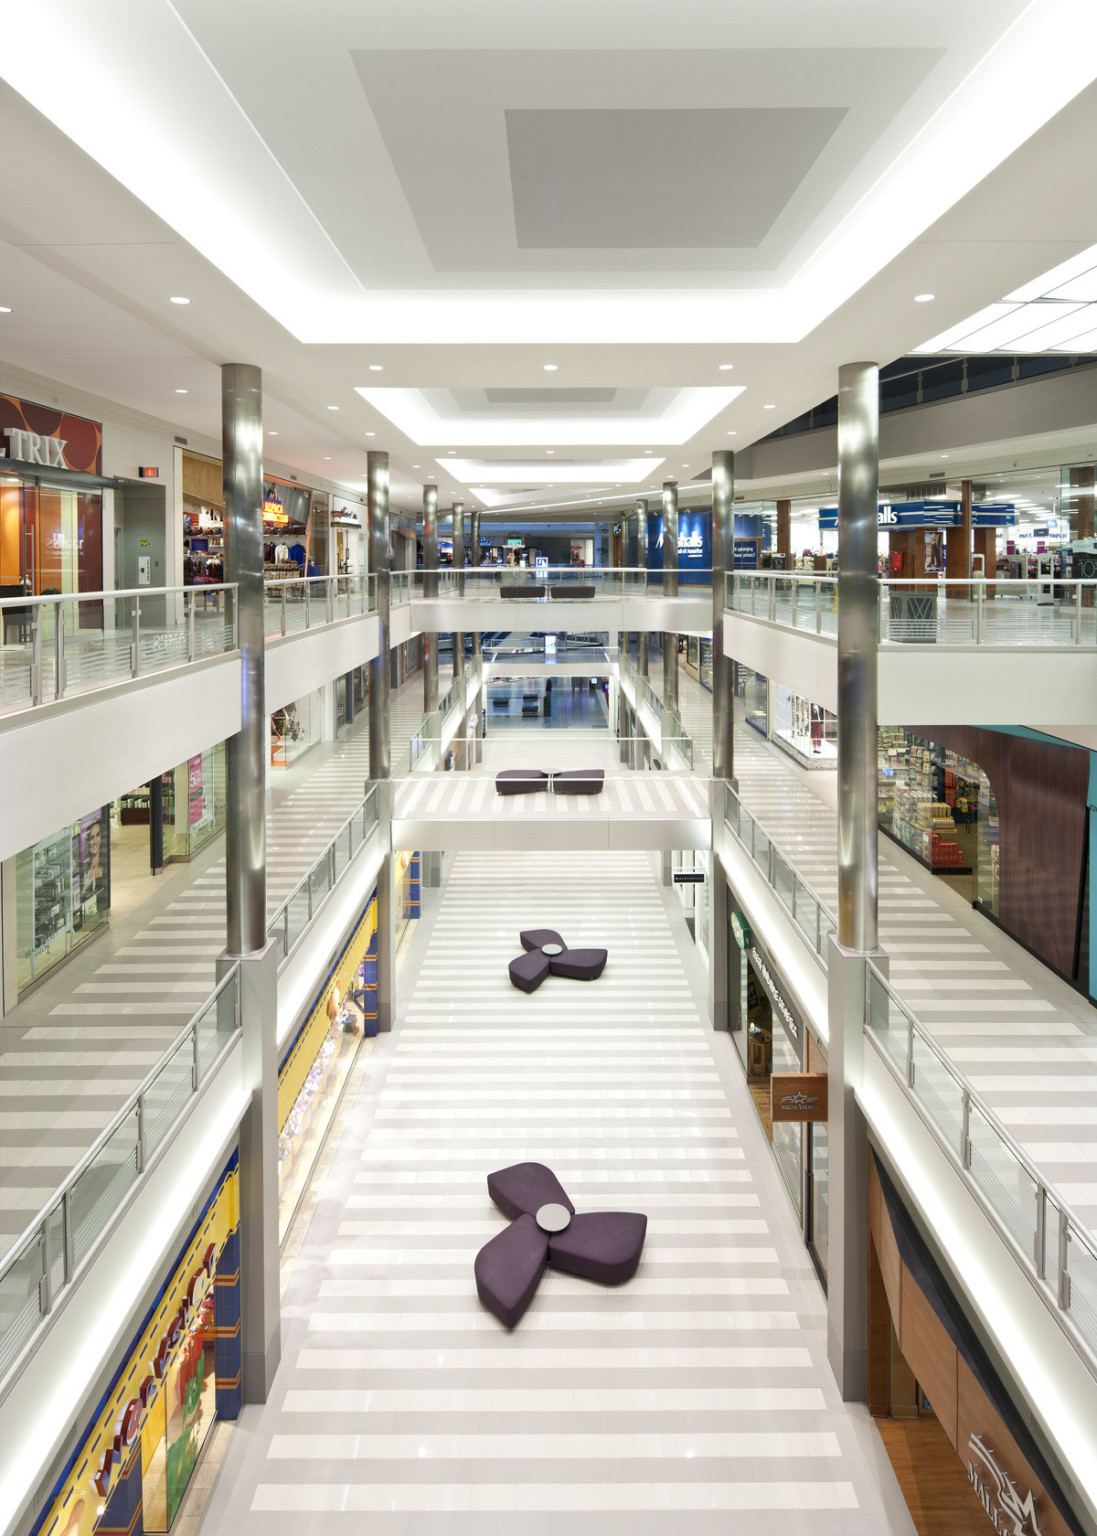 Interior of mall with triple height walkways lined with shops. Purple pinwheel shaped seats down the 1st floor central aisle